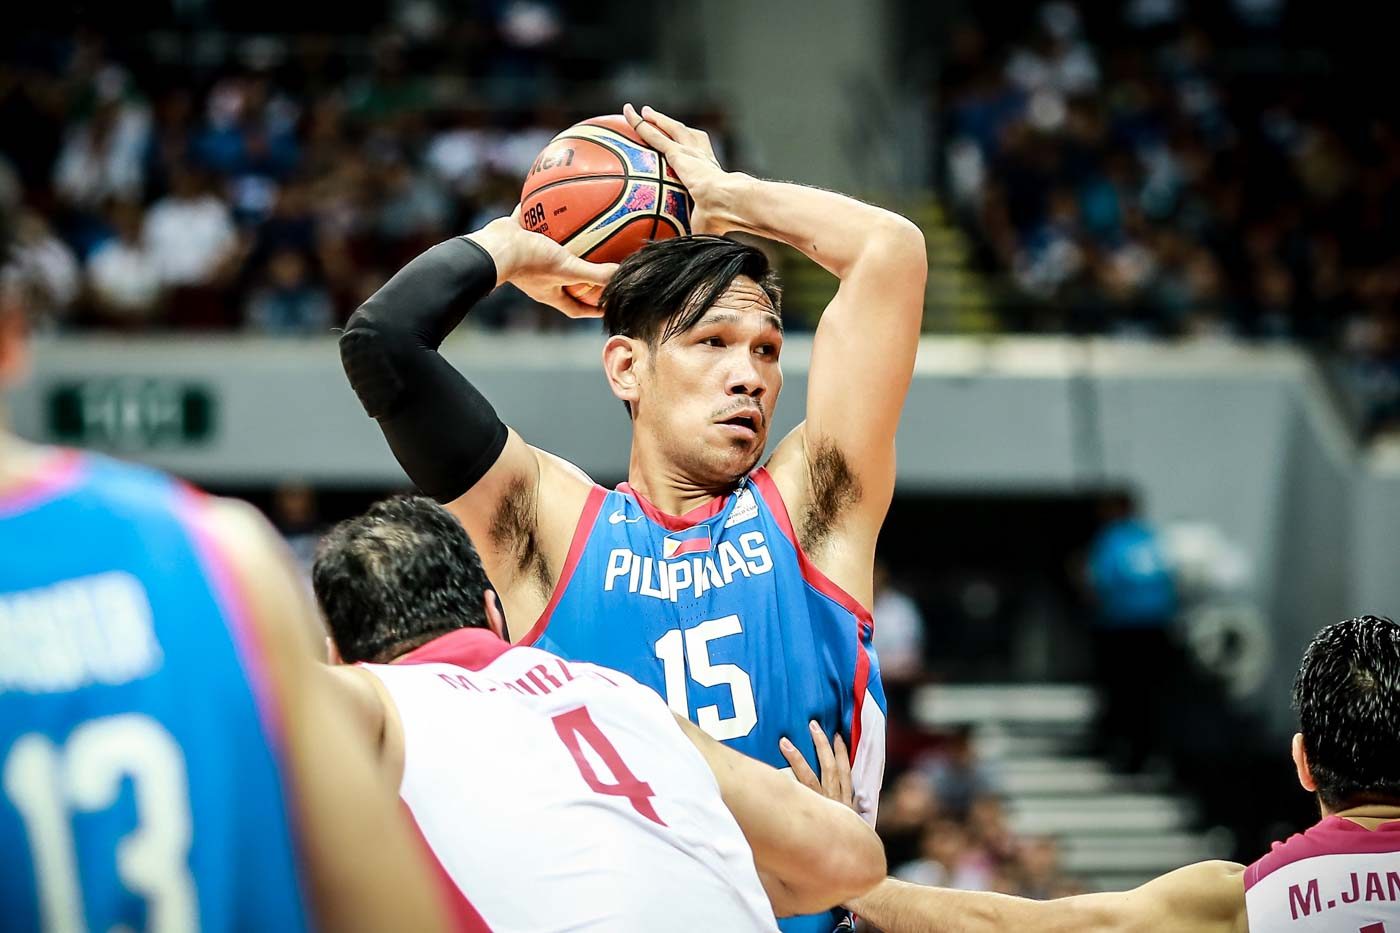 Fajardo left in frustration after missed free throws in Gilas loss